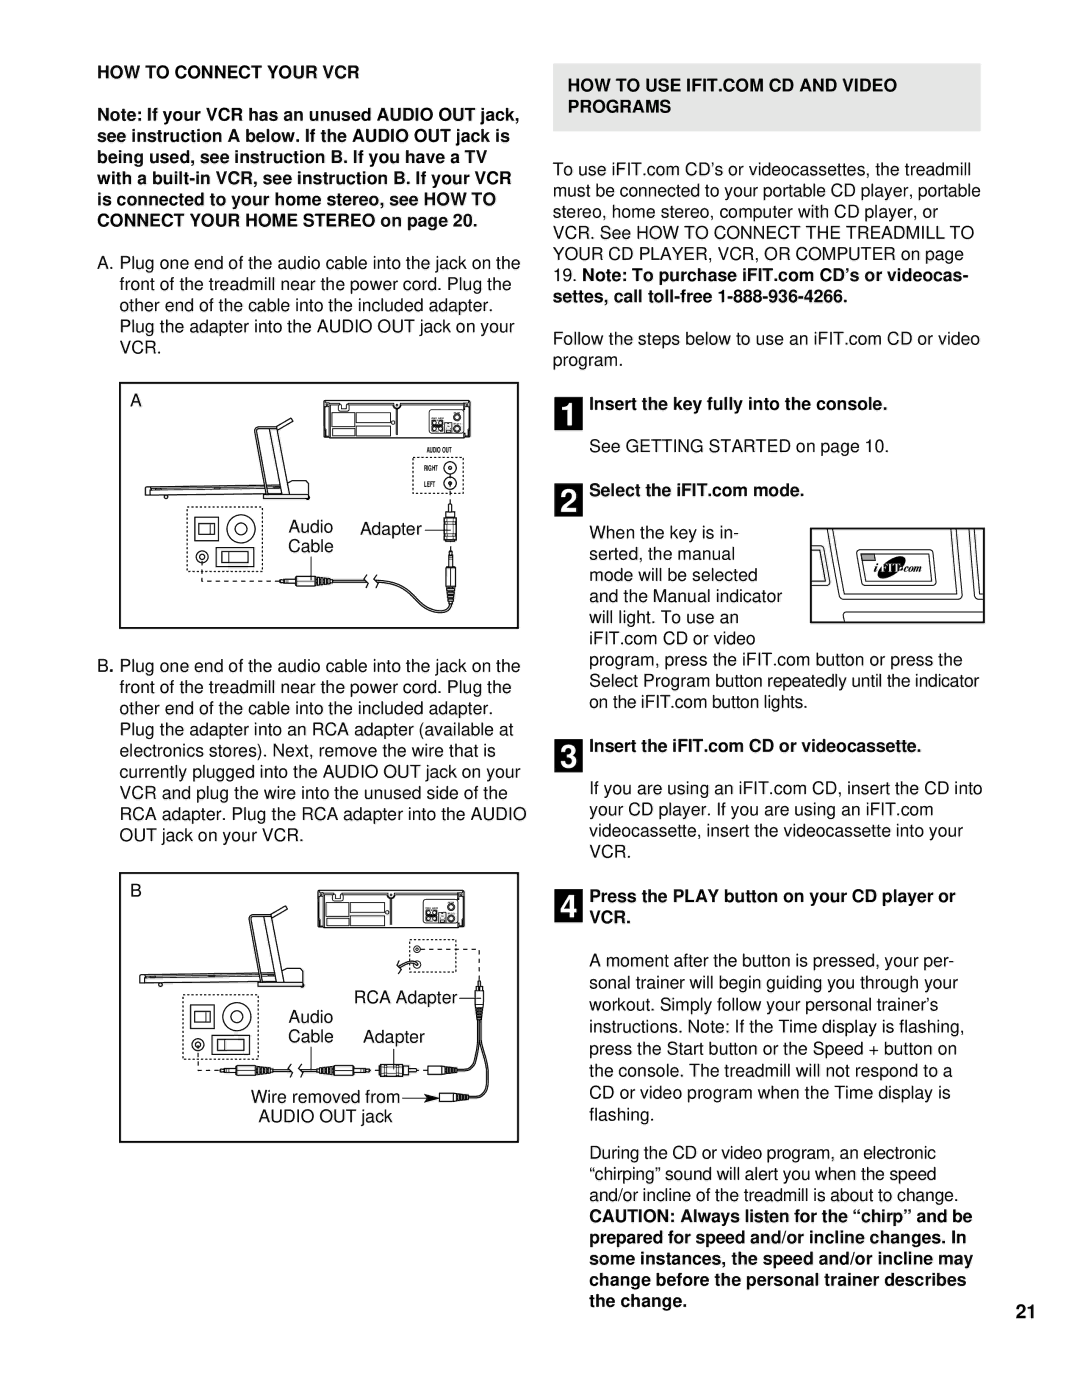 NordicTrack NCTL11991 HOW to Connect Your VCR, Audio, Cable, Programs, PressVCR. the Play button on your CD player or 